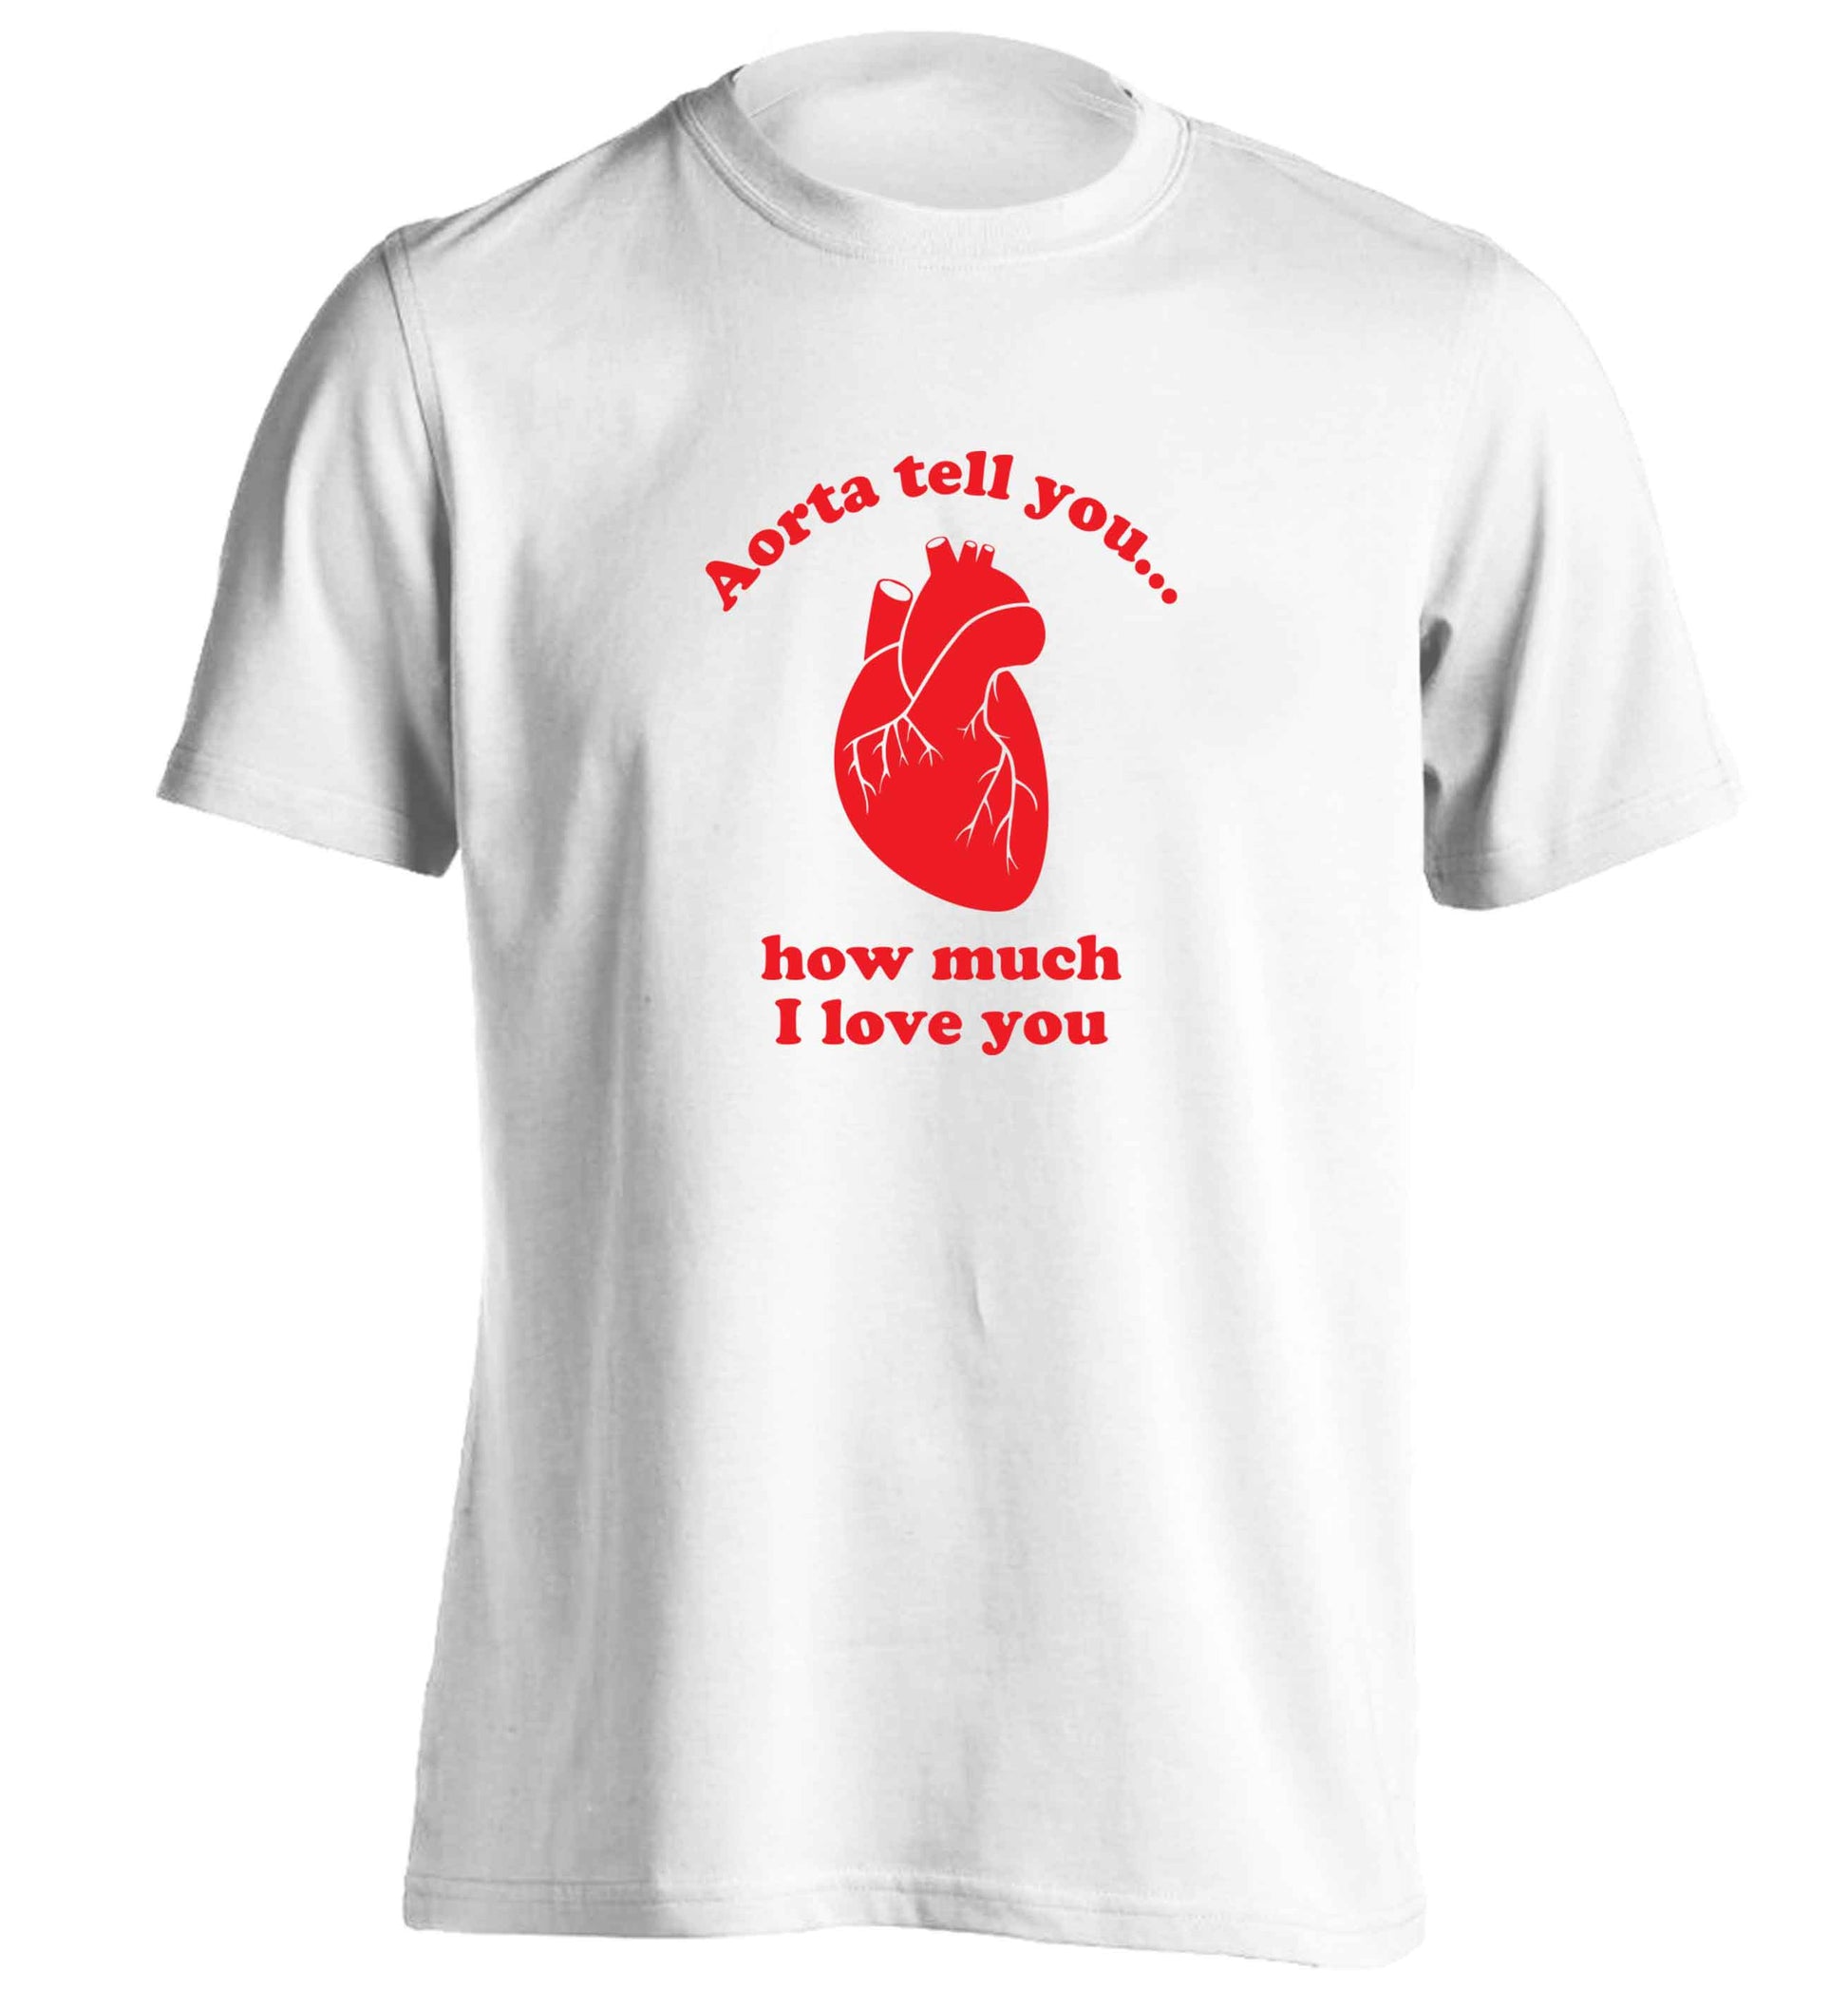 Aorta tell you how much I love you adults unisex white Tshirt 2XL